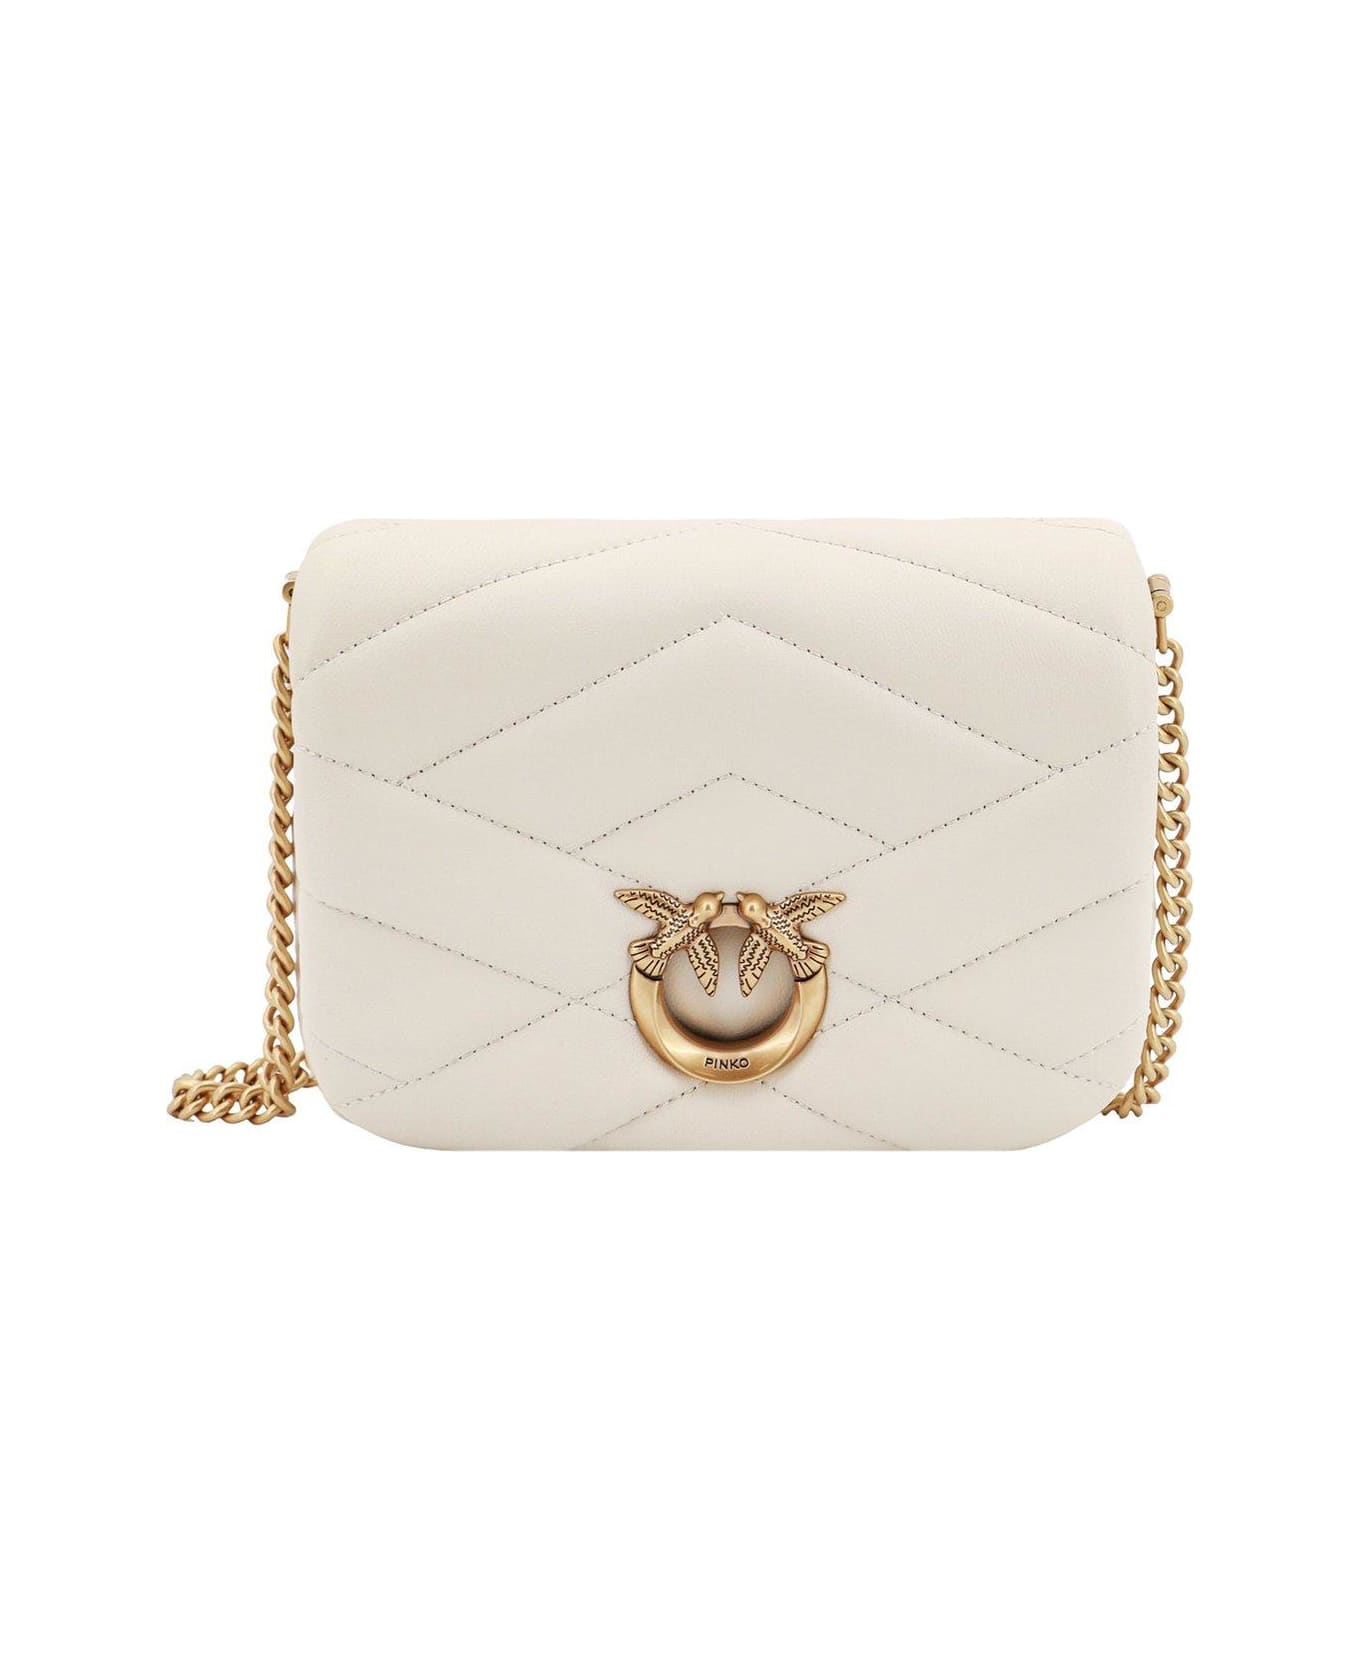 Pinko Love Birds Buckle Quilted Shoulder Bag - White